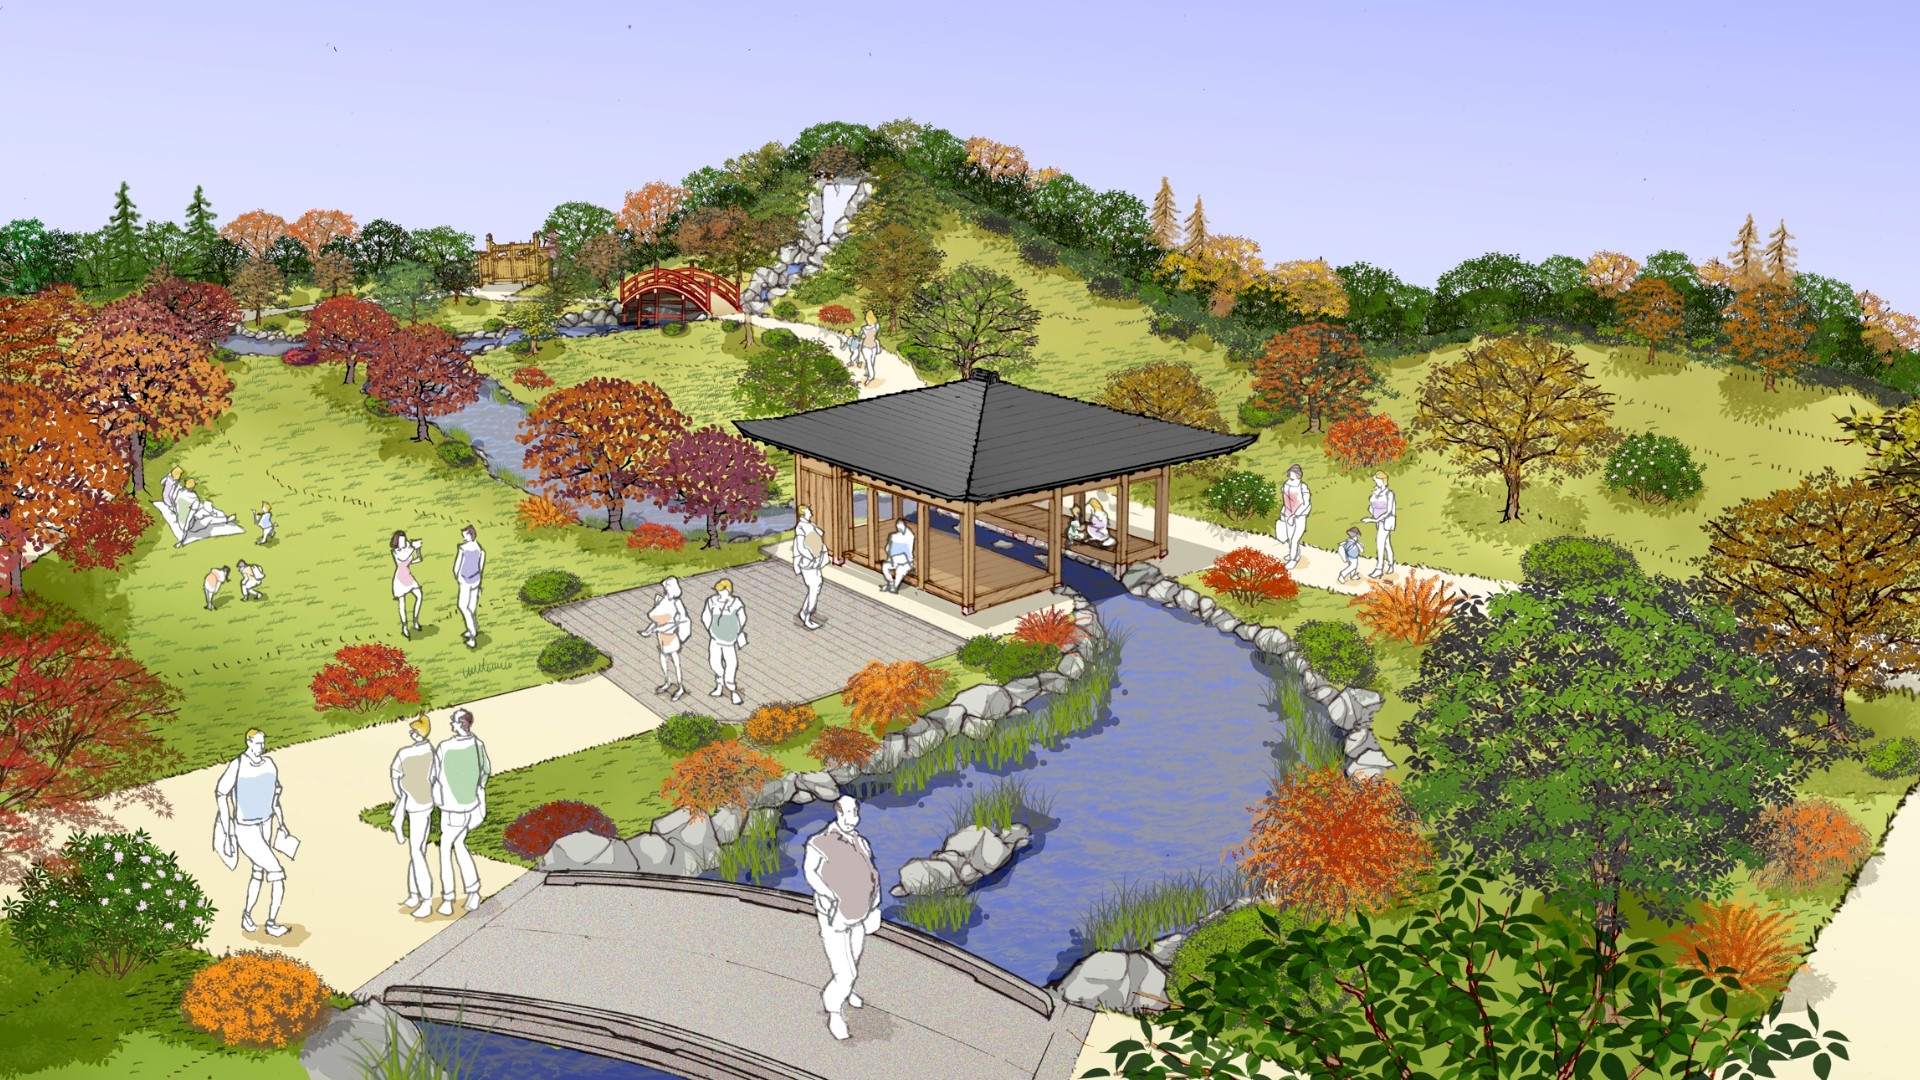 The $22 million, 2-acre project will be completed over the course of 24 months, with craftsmen from Japan meticulously constructing elements of the garden.